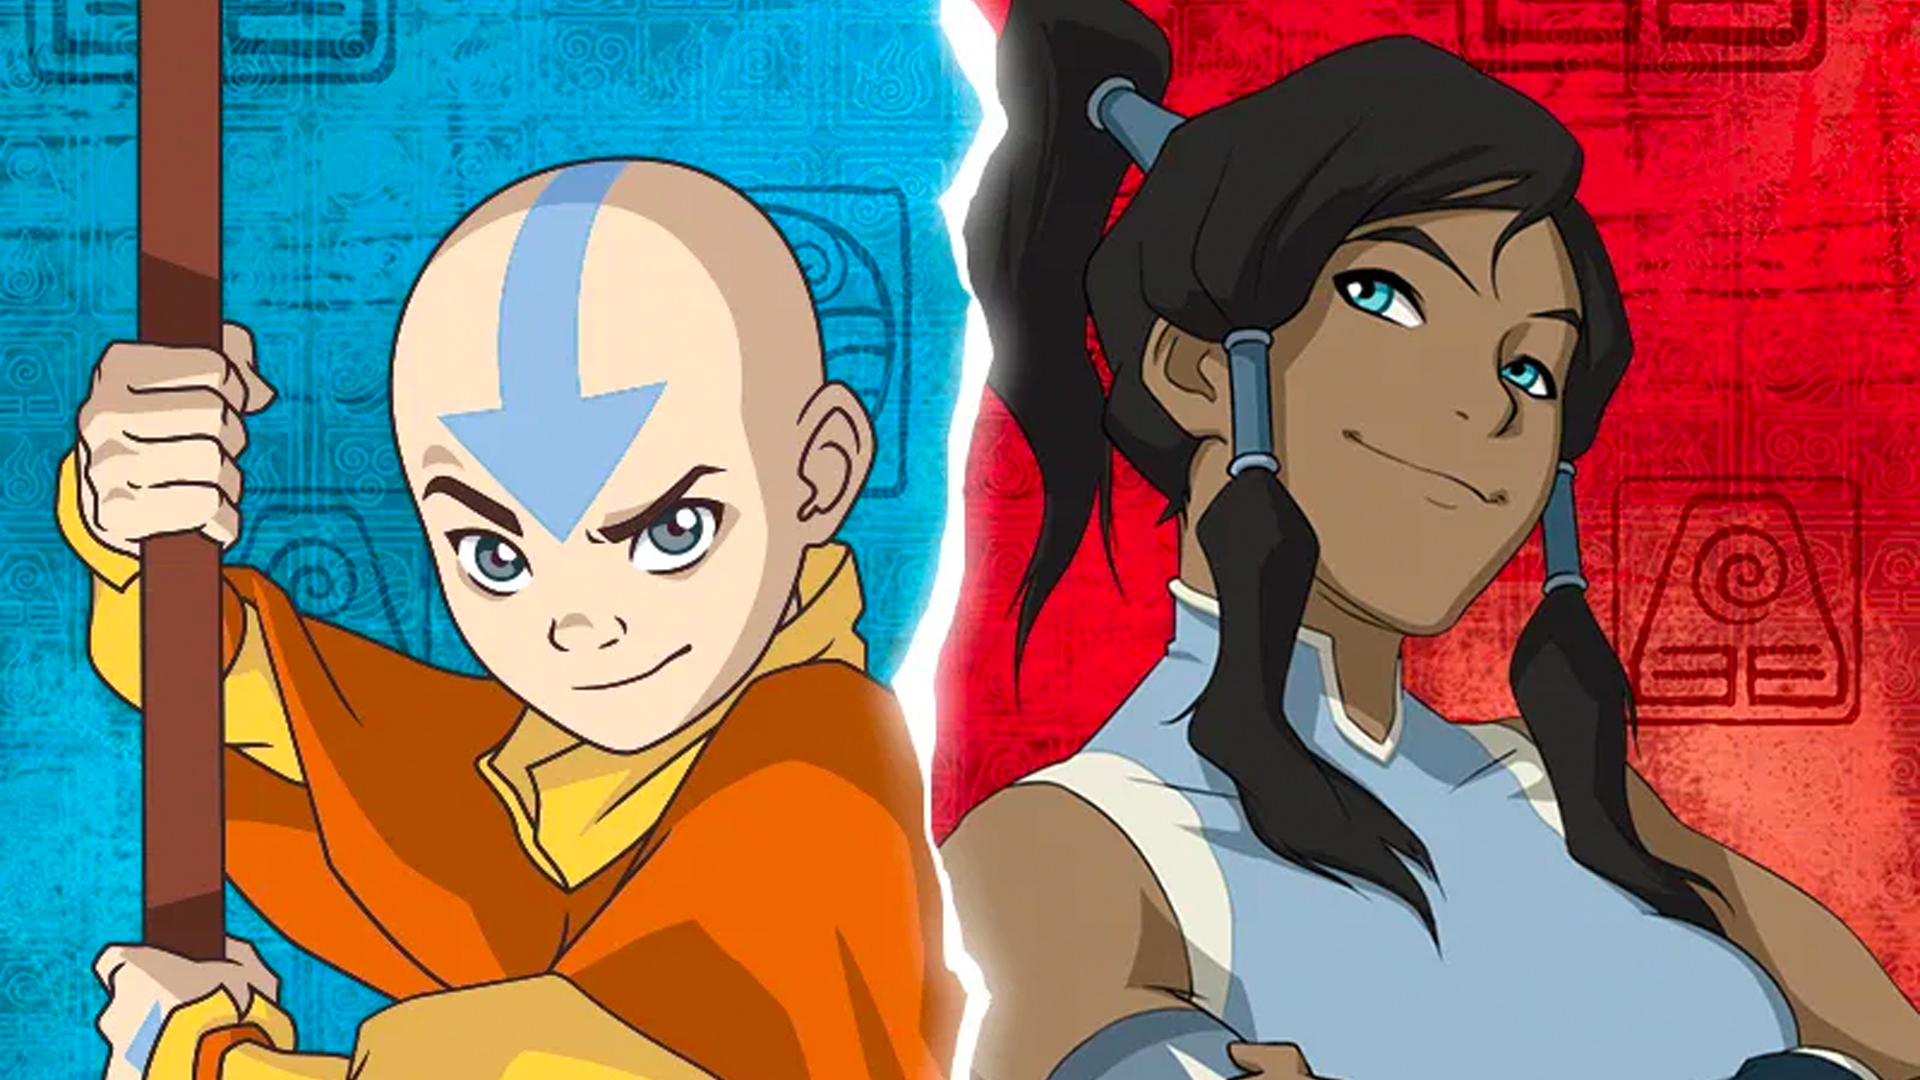 Avatar The Last Airbender A Feminist Work of American Animation